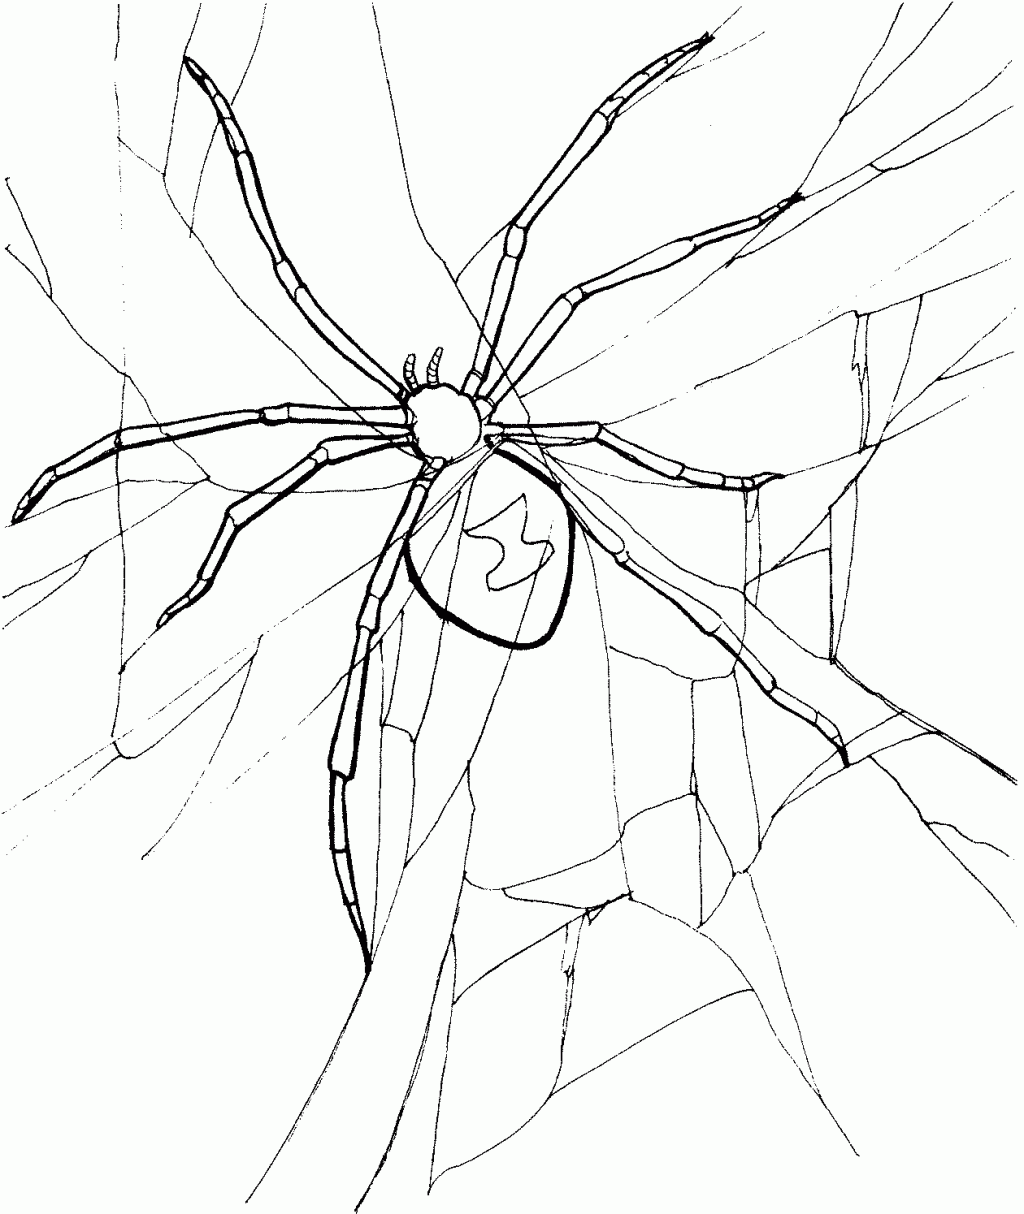 White Tail Spider coloring #17, Download drawings